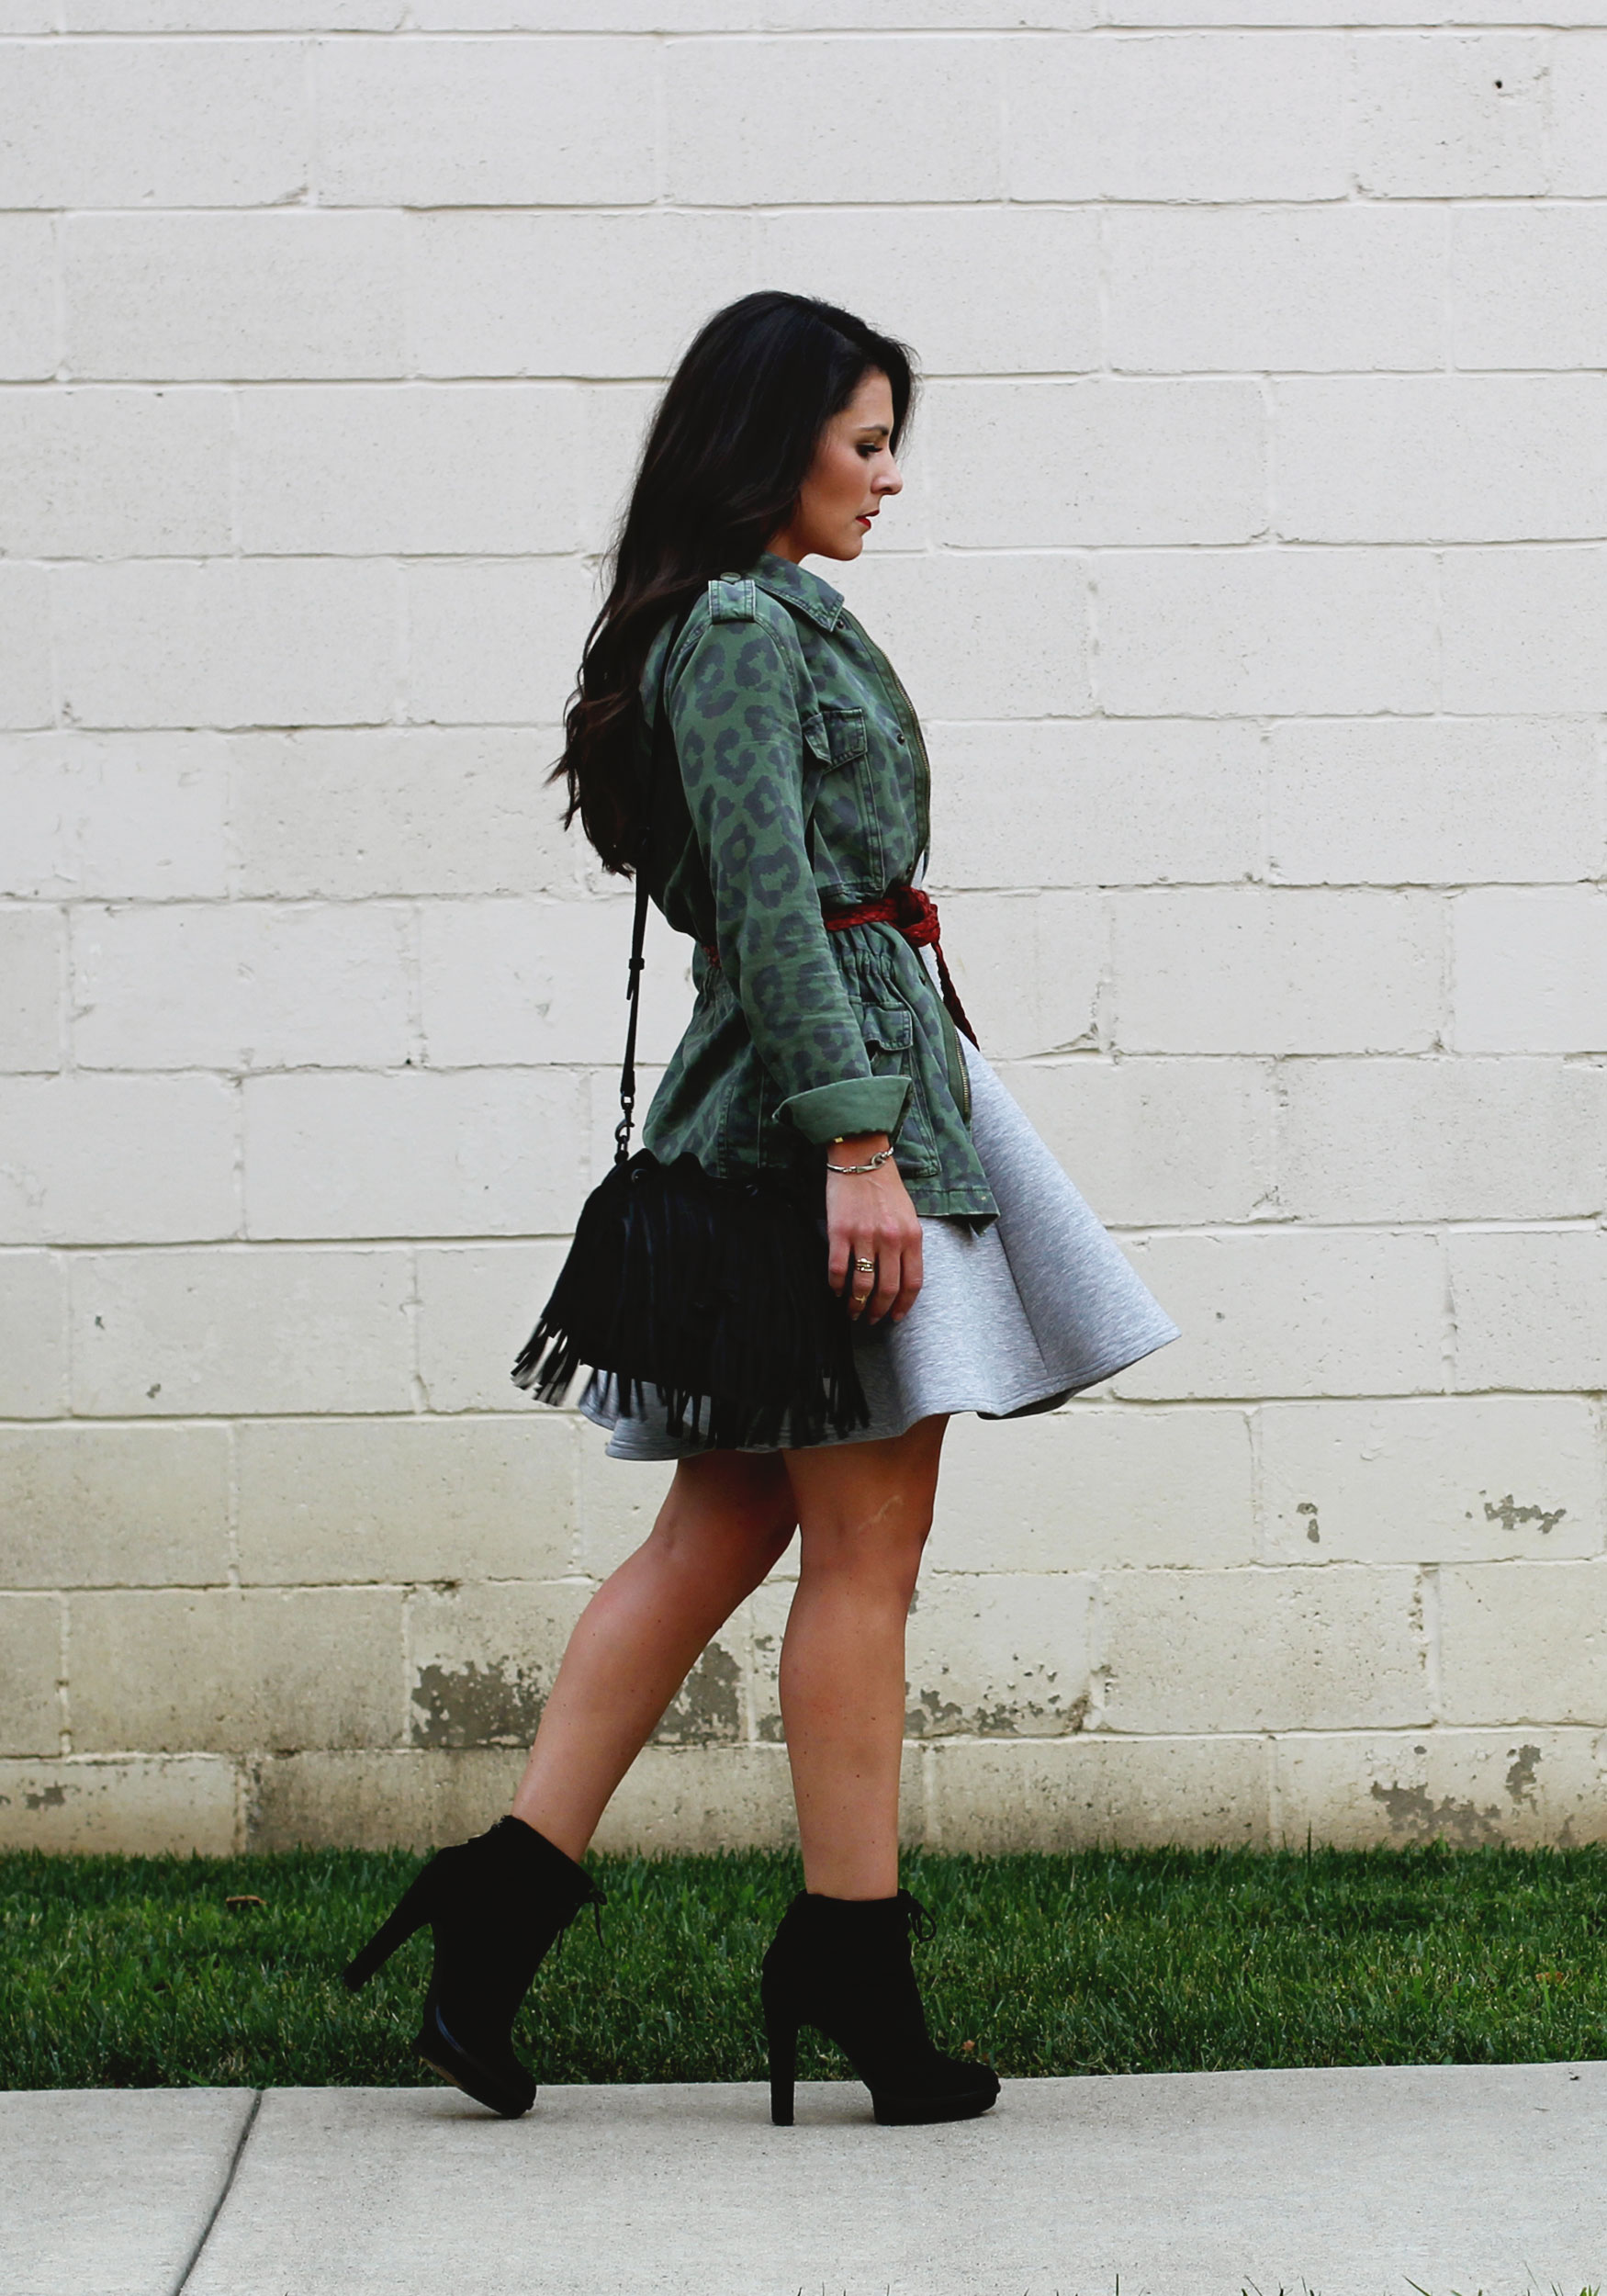 Fall Fashion Layering, Minkpink Stagnant Dress, Urban Outfitters Anorak, Belted with Red Belt, Black Elizabeth and James Booties, Rebecca Minkoff Fringe Bucket Bag